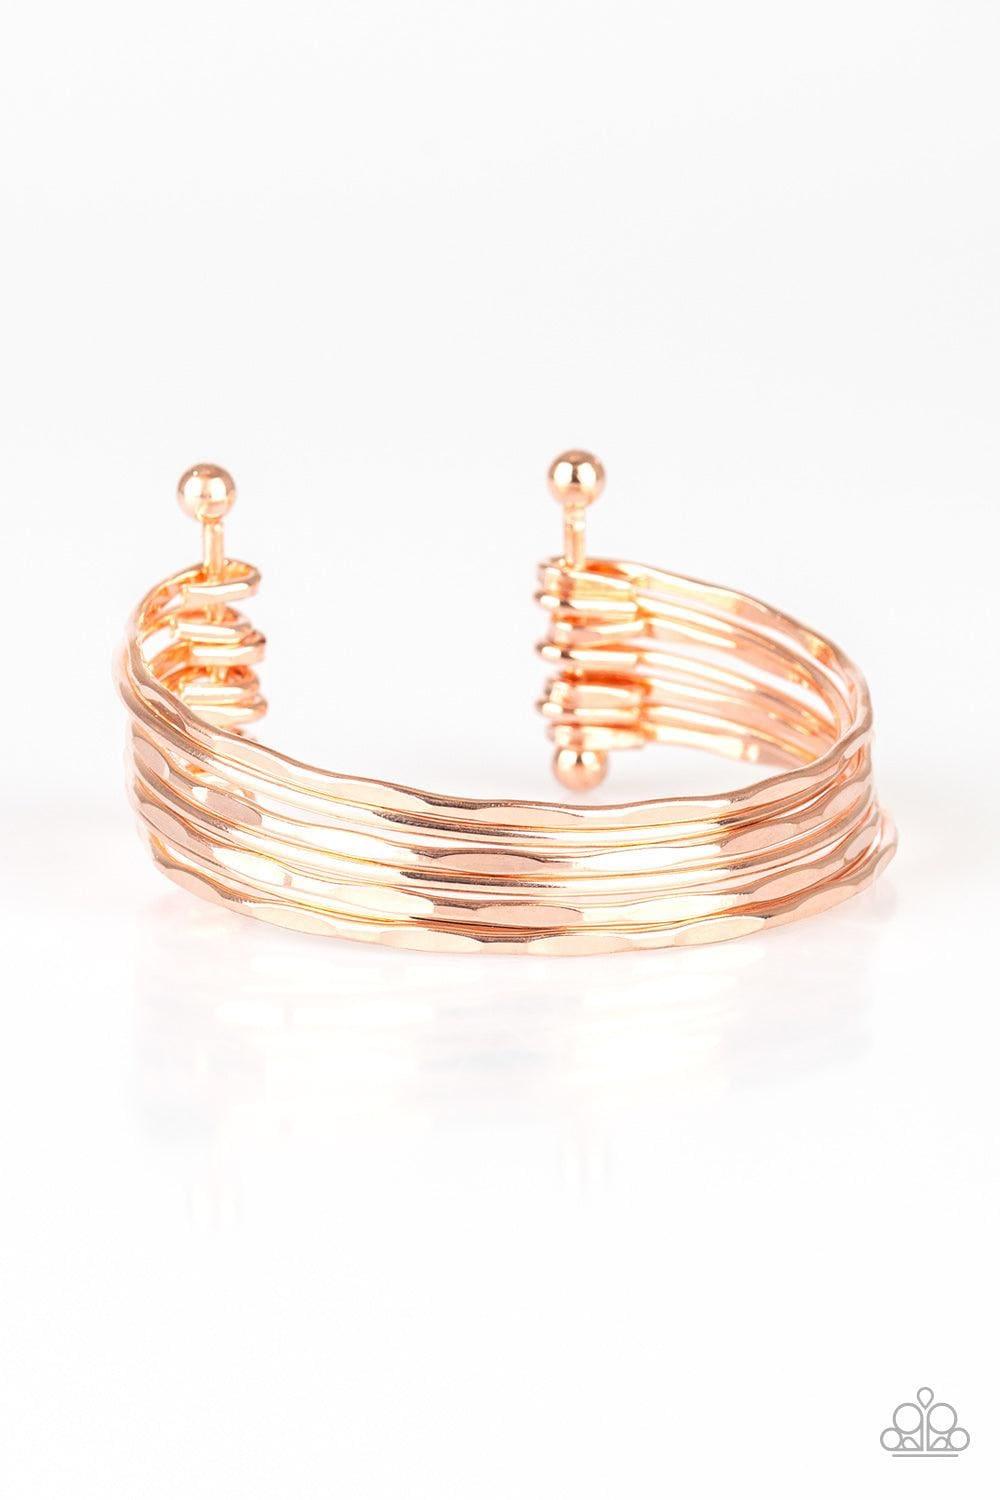 Paparazzi Accessories - Timelessly Textured - Rose Gold Bracelet - Bling by JessieK